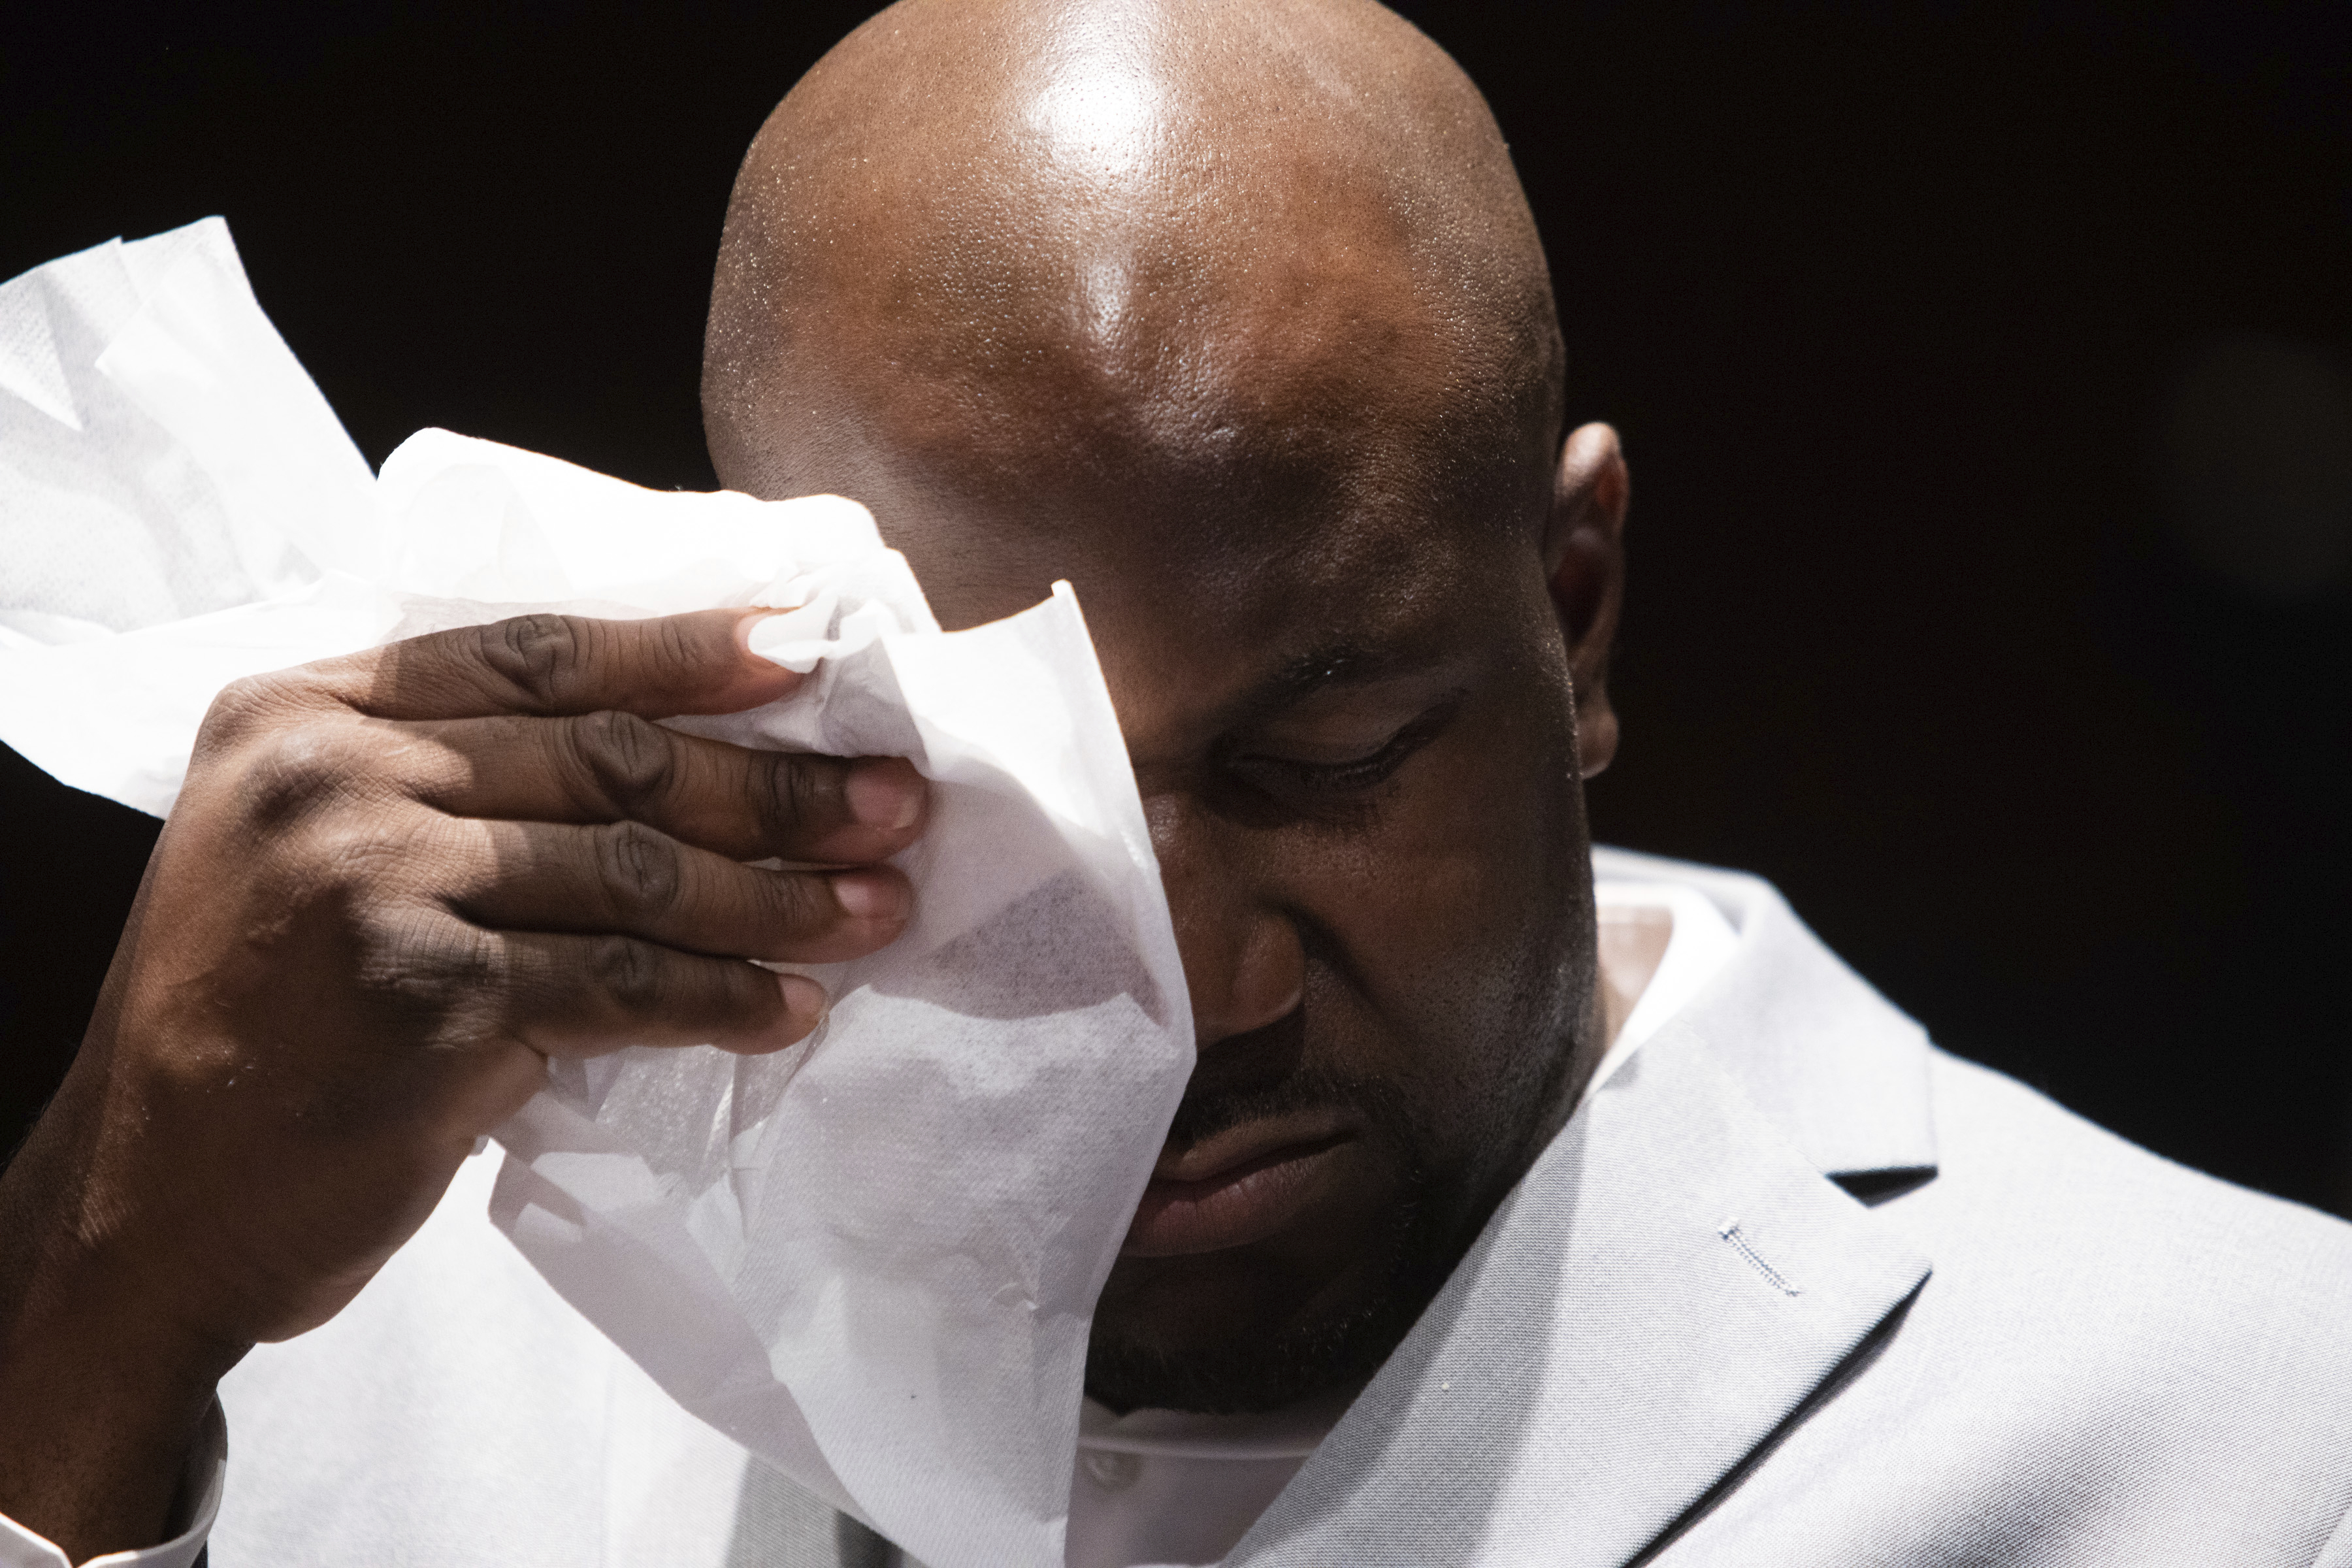 Philonise Floyd, a brother of George Floyd, reacts as he describes the pain of losing his brother as he testifies during a House Judiciary Committee hearing on proposed changes to police practices and accountability on Capitol Hill, Wednesday, June 10, 2020, in Washington. Photo: AP